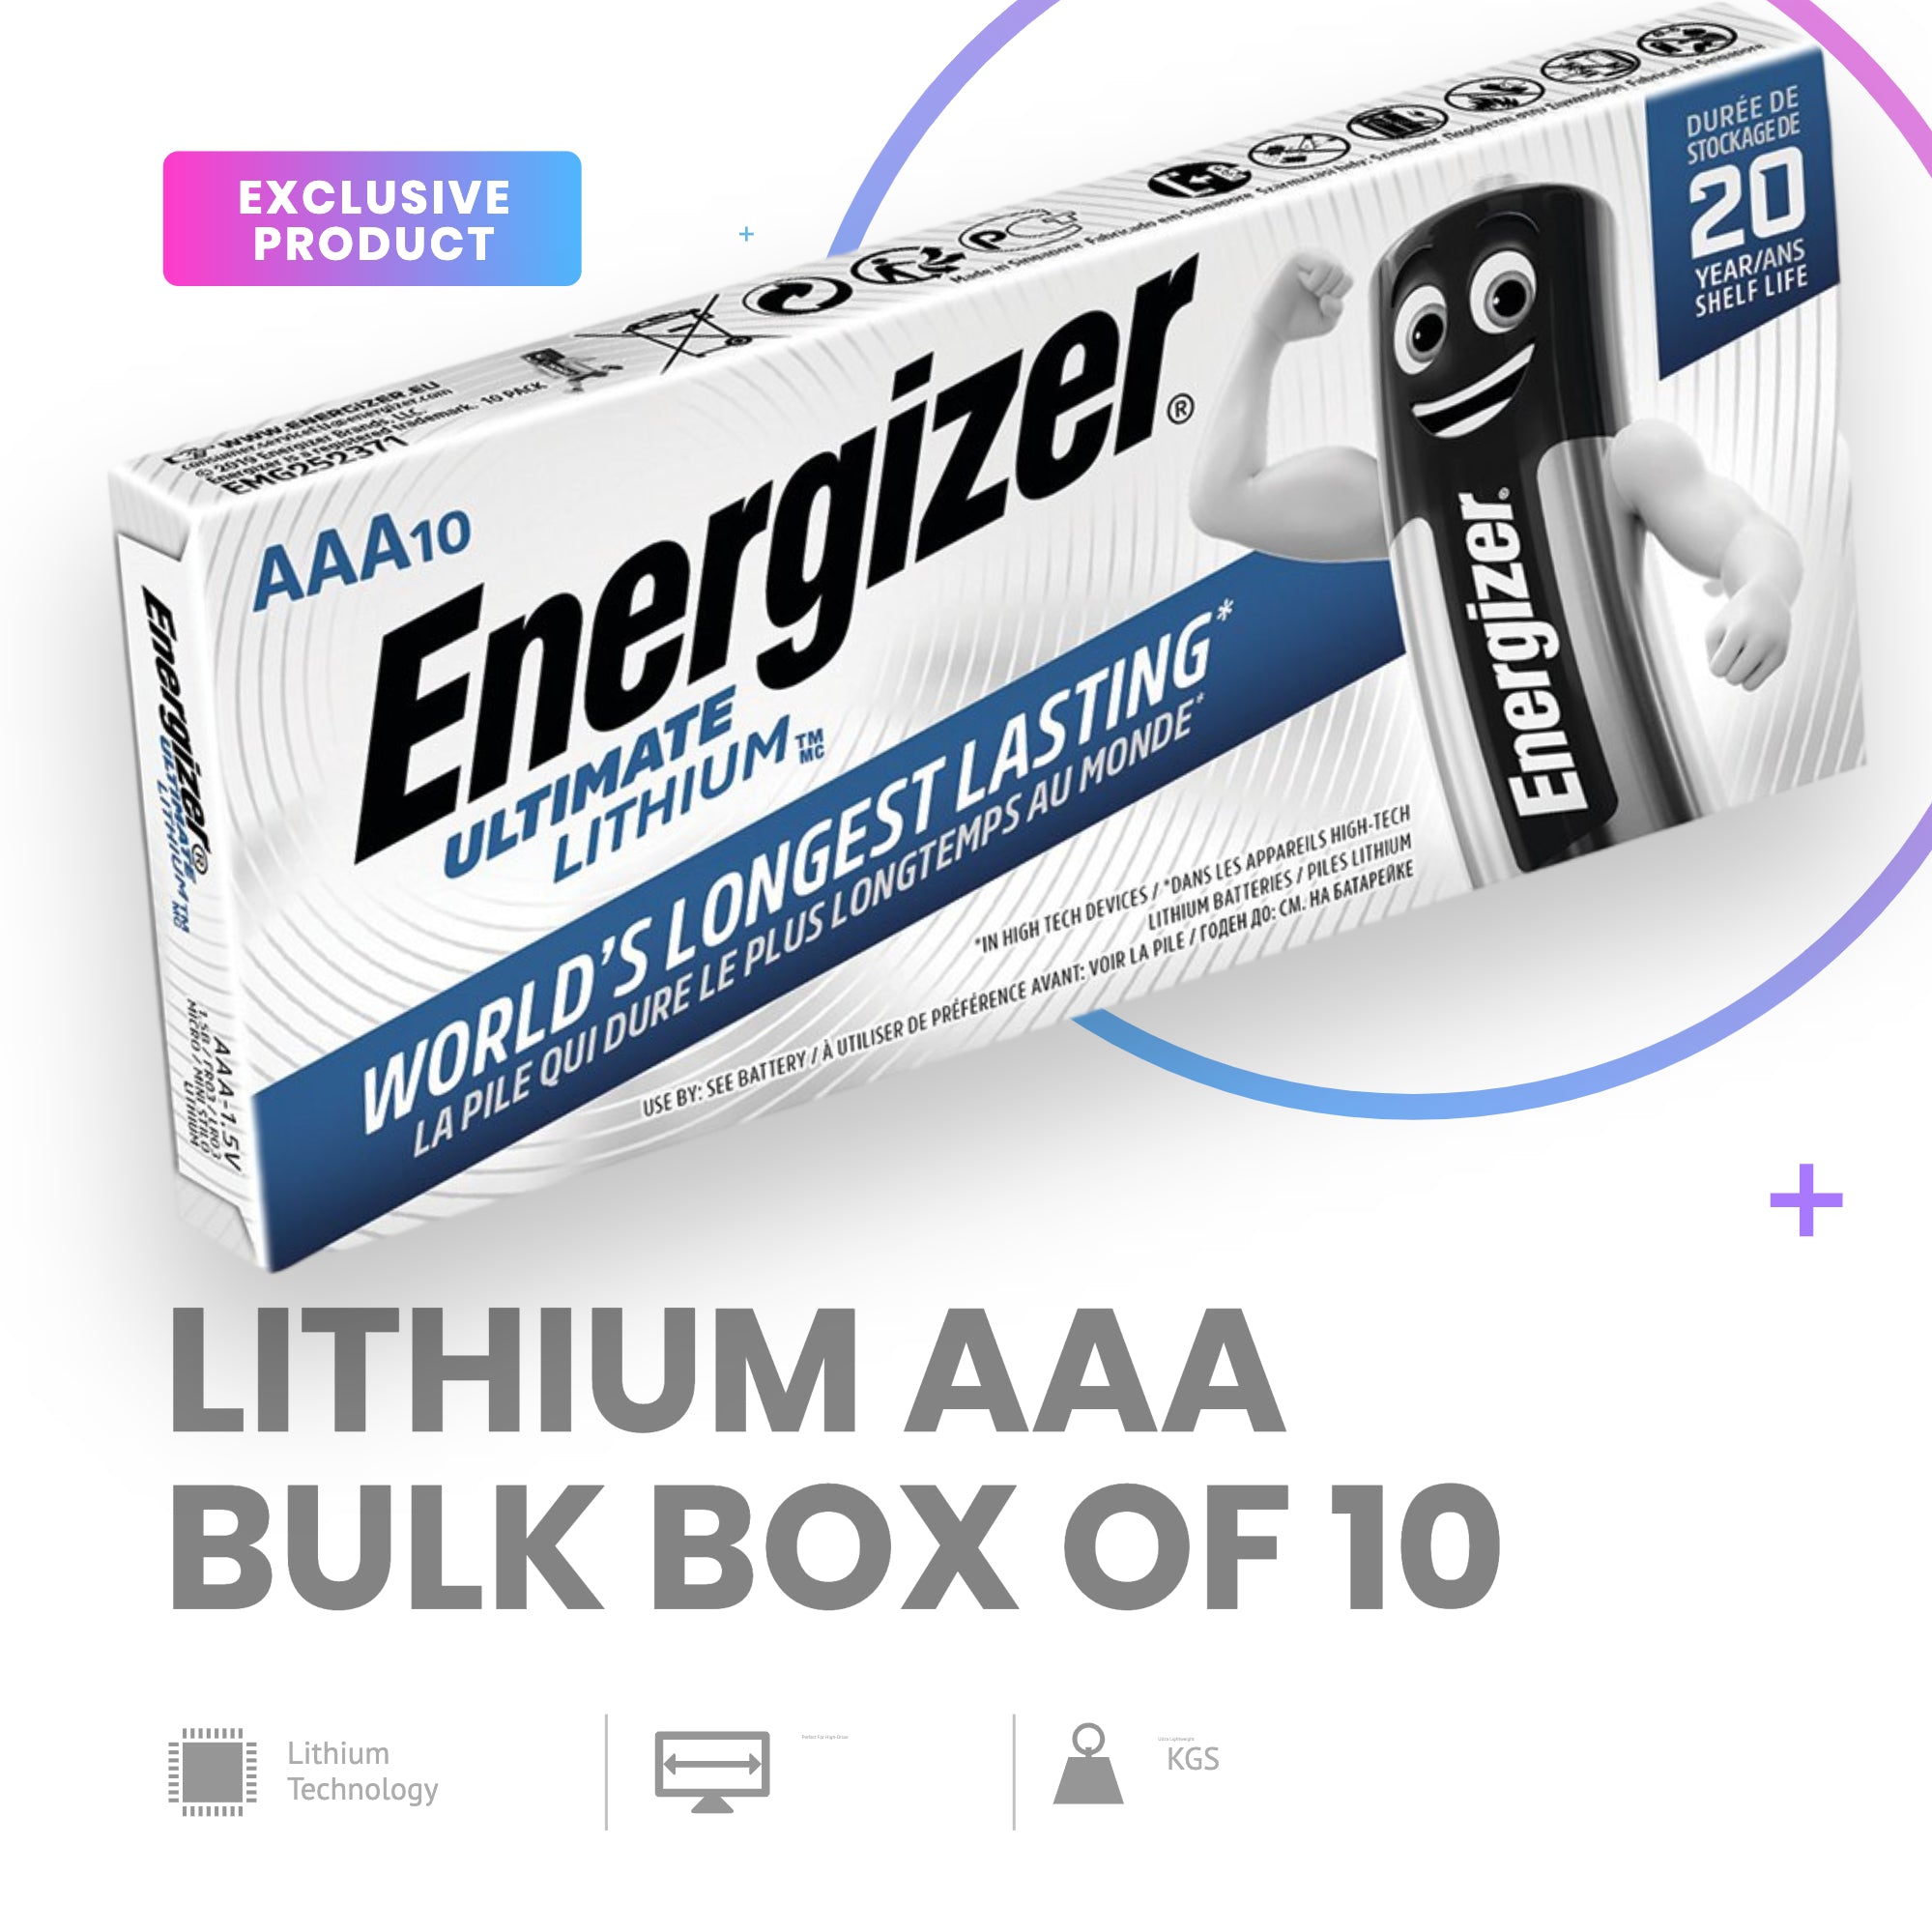  Energizer AAA Batteries, Ultimate Lithium Triple A Battery, 24  Count : Health & Household